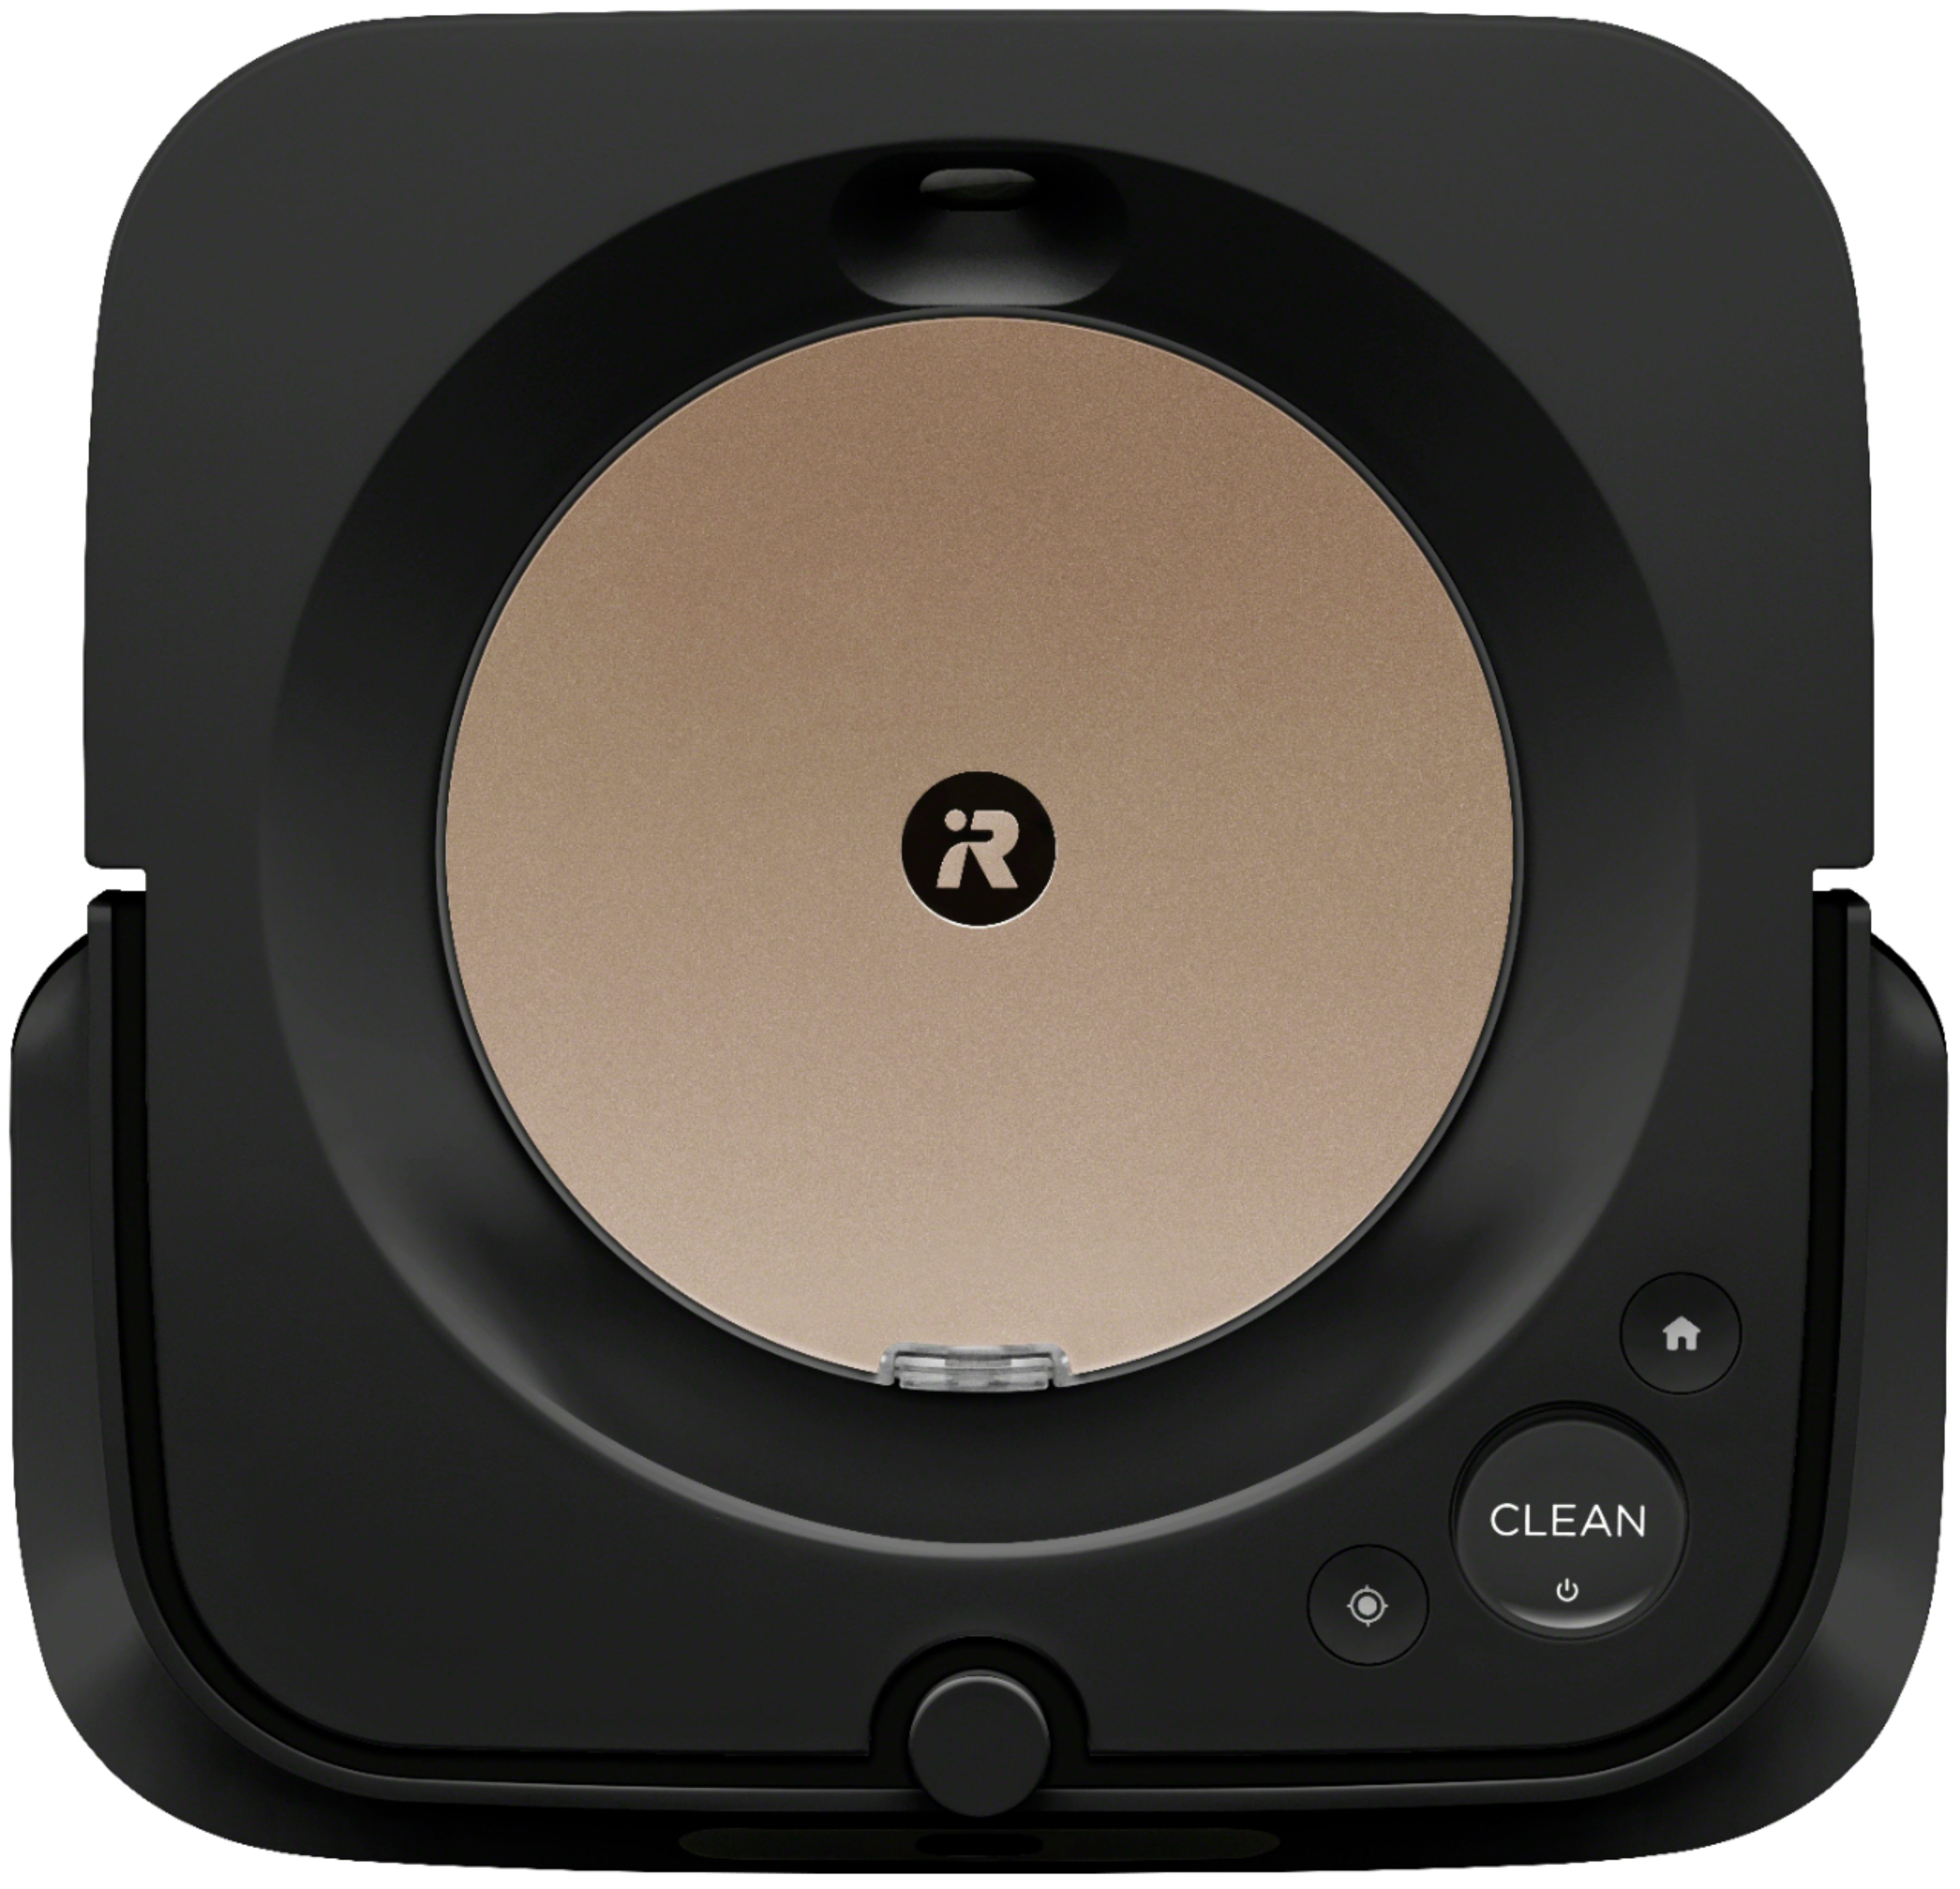 Angle View: bObsweep - PetHair SLAM Wi-Fi Connected Robot Vacuum Cleaner - Midnight